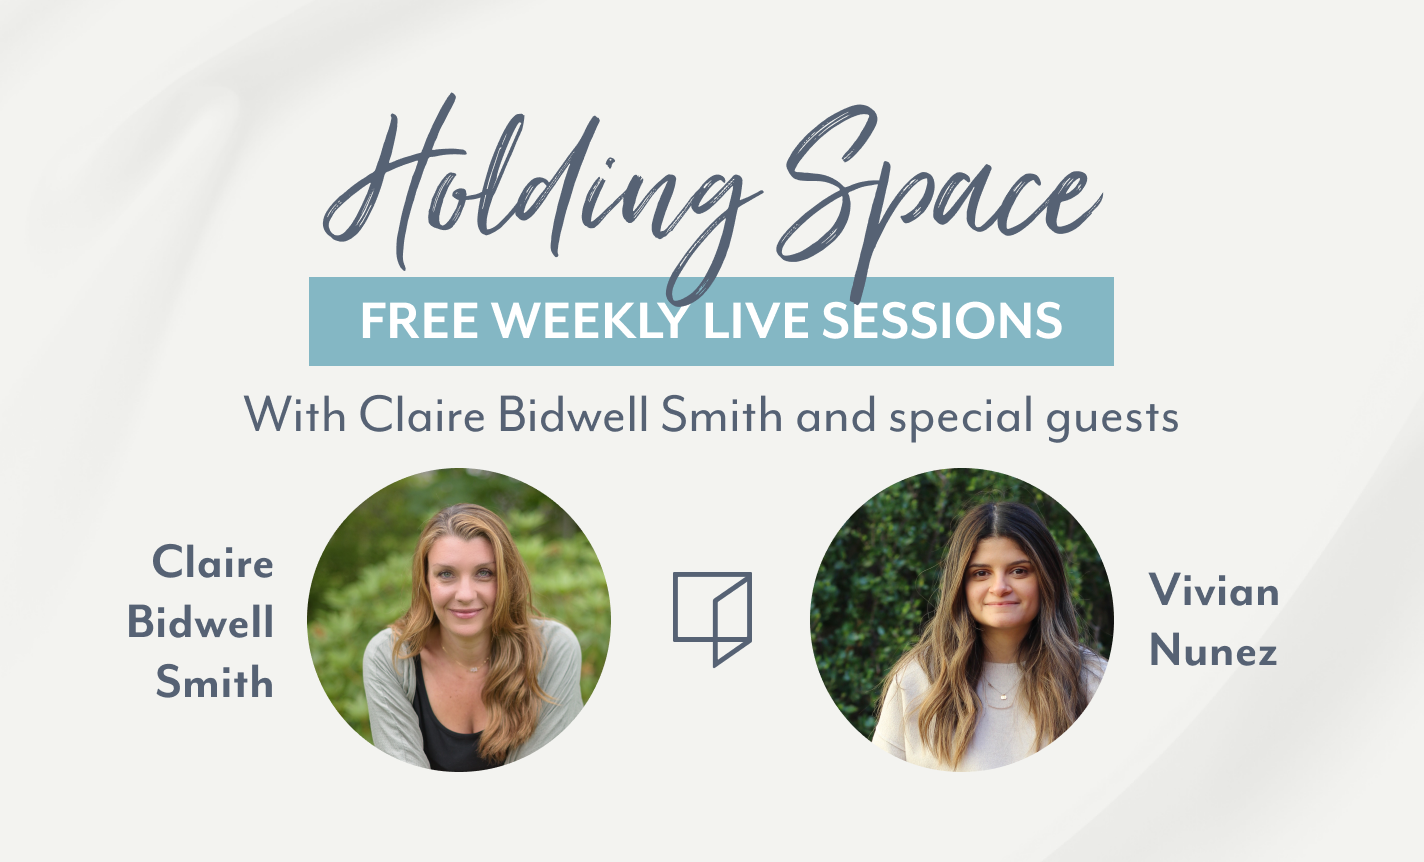 Holding Space with Claire Bidwell Smith and Vivian Nunez